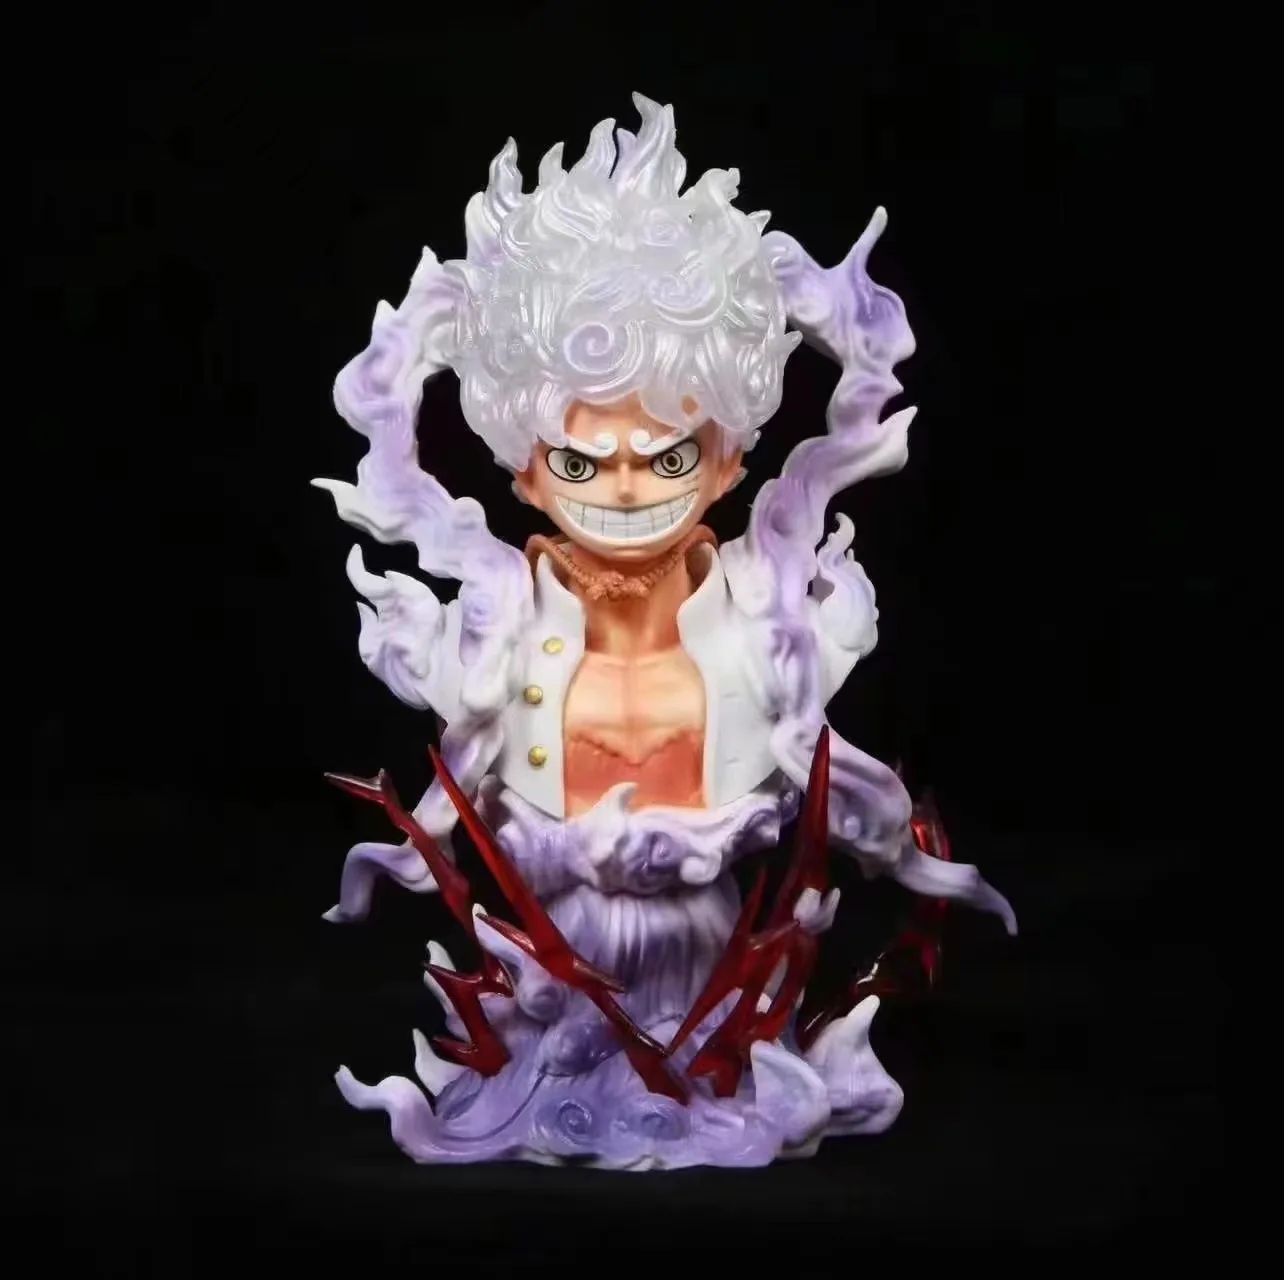 

One Piece Luffy Gear 5 Anime Figure Sun God Nika 17cm PVC Action Figurine Statue Collectible Model Doll Toys for Children Gift